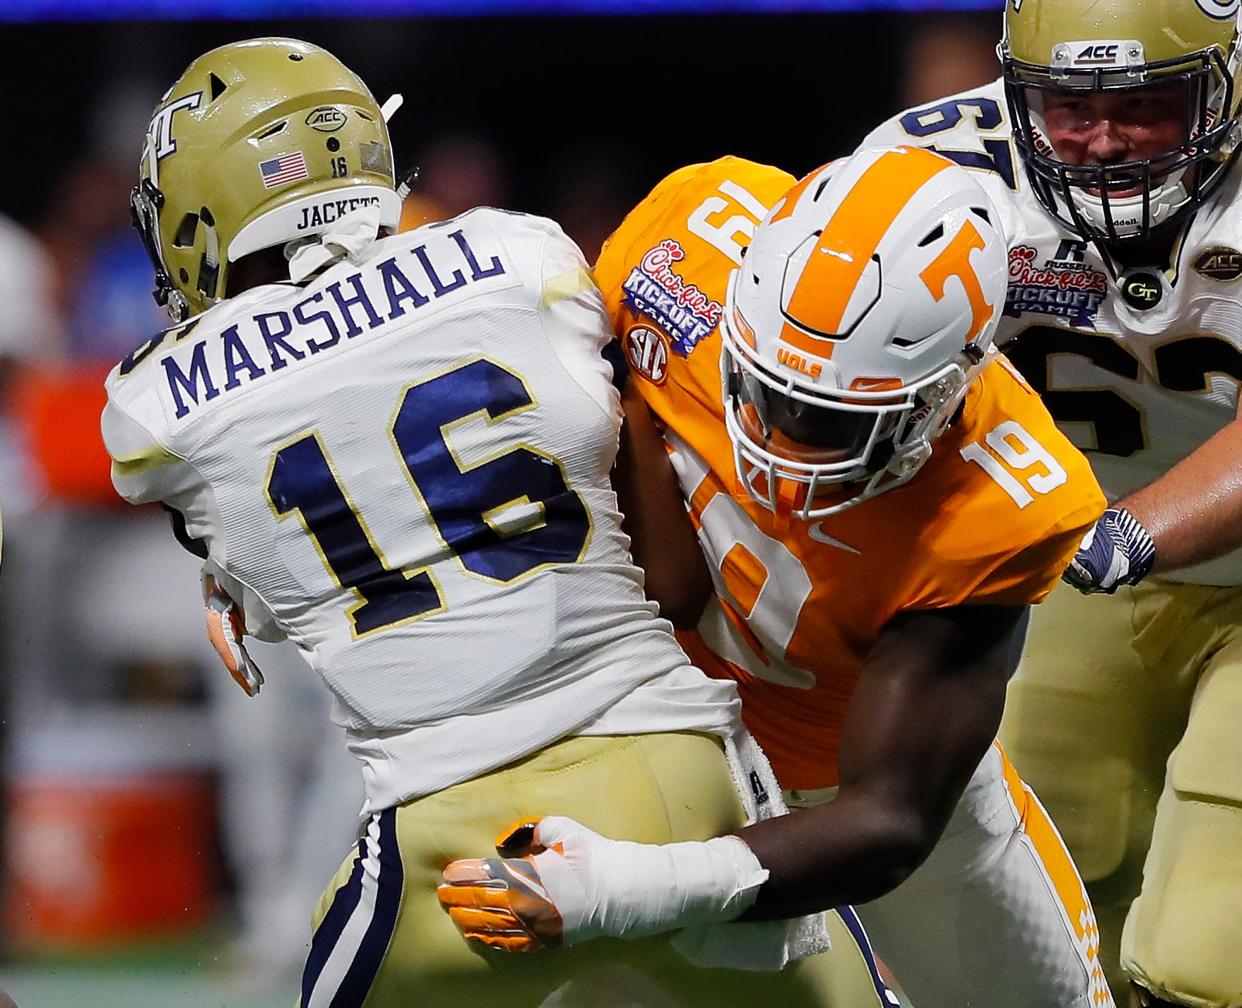 ATLANTA, GA – SEPTEMBER 04: Darrell Taylor #19 of the Tennessee Volunteers sacks TaQuon Marshall #16 of the Georgia Tech Yellow Jackets at Mercedes-Benz Stadium on September 4, 2017 in Atlanta, Georgia. (Photo by Kevin C. Cox/Getty Images)